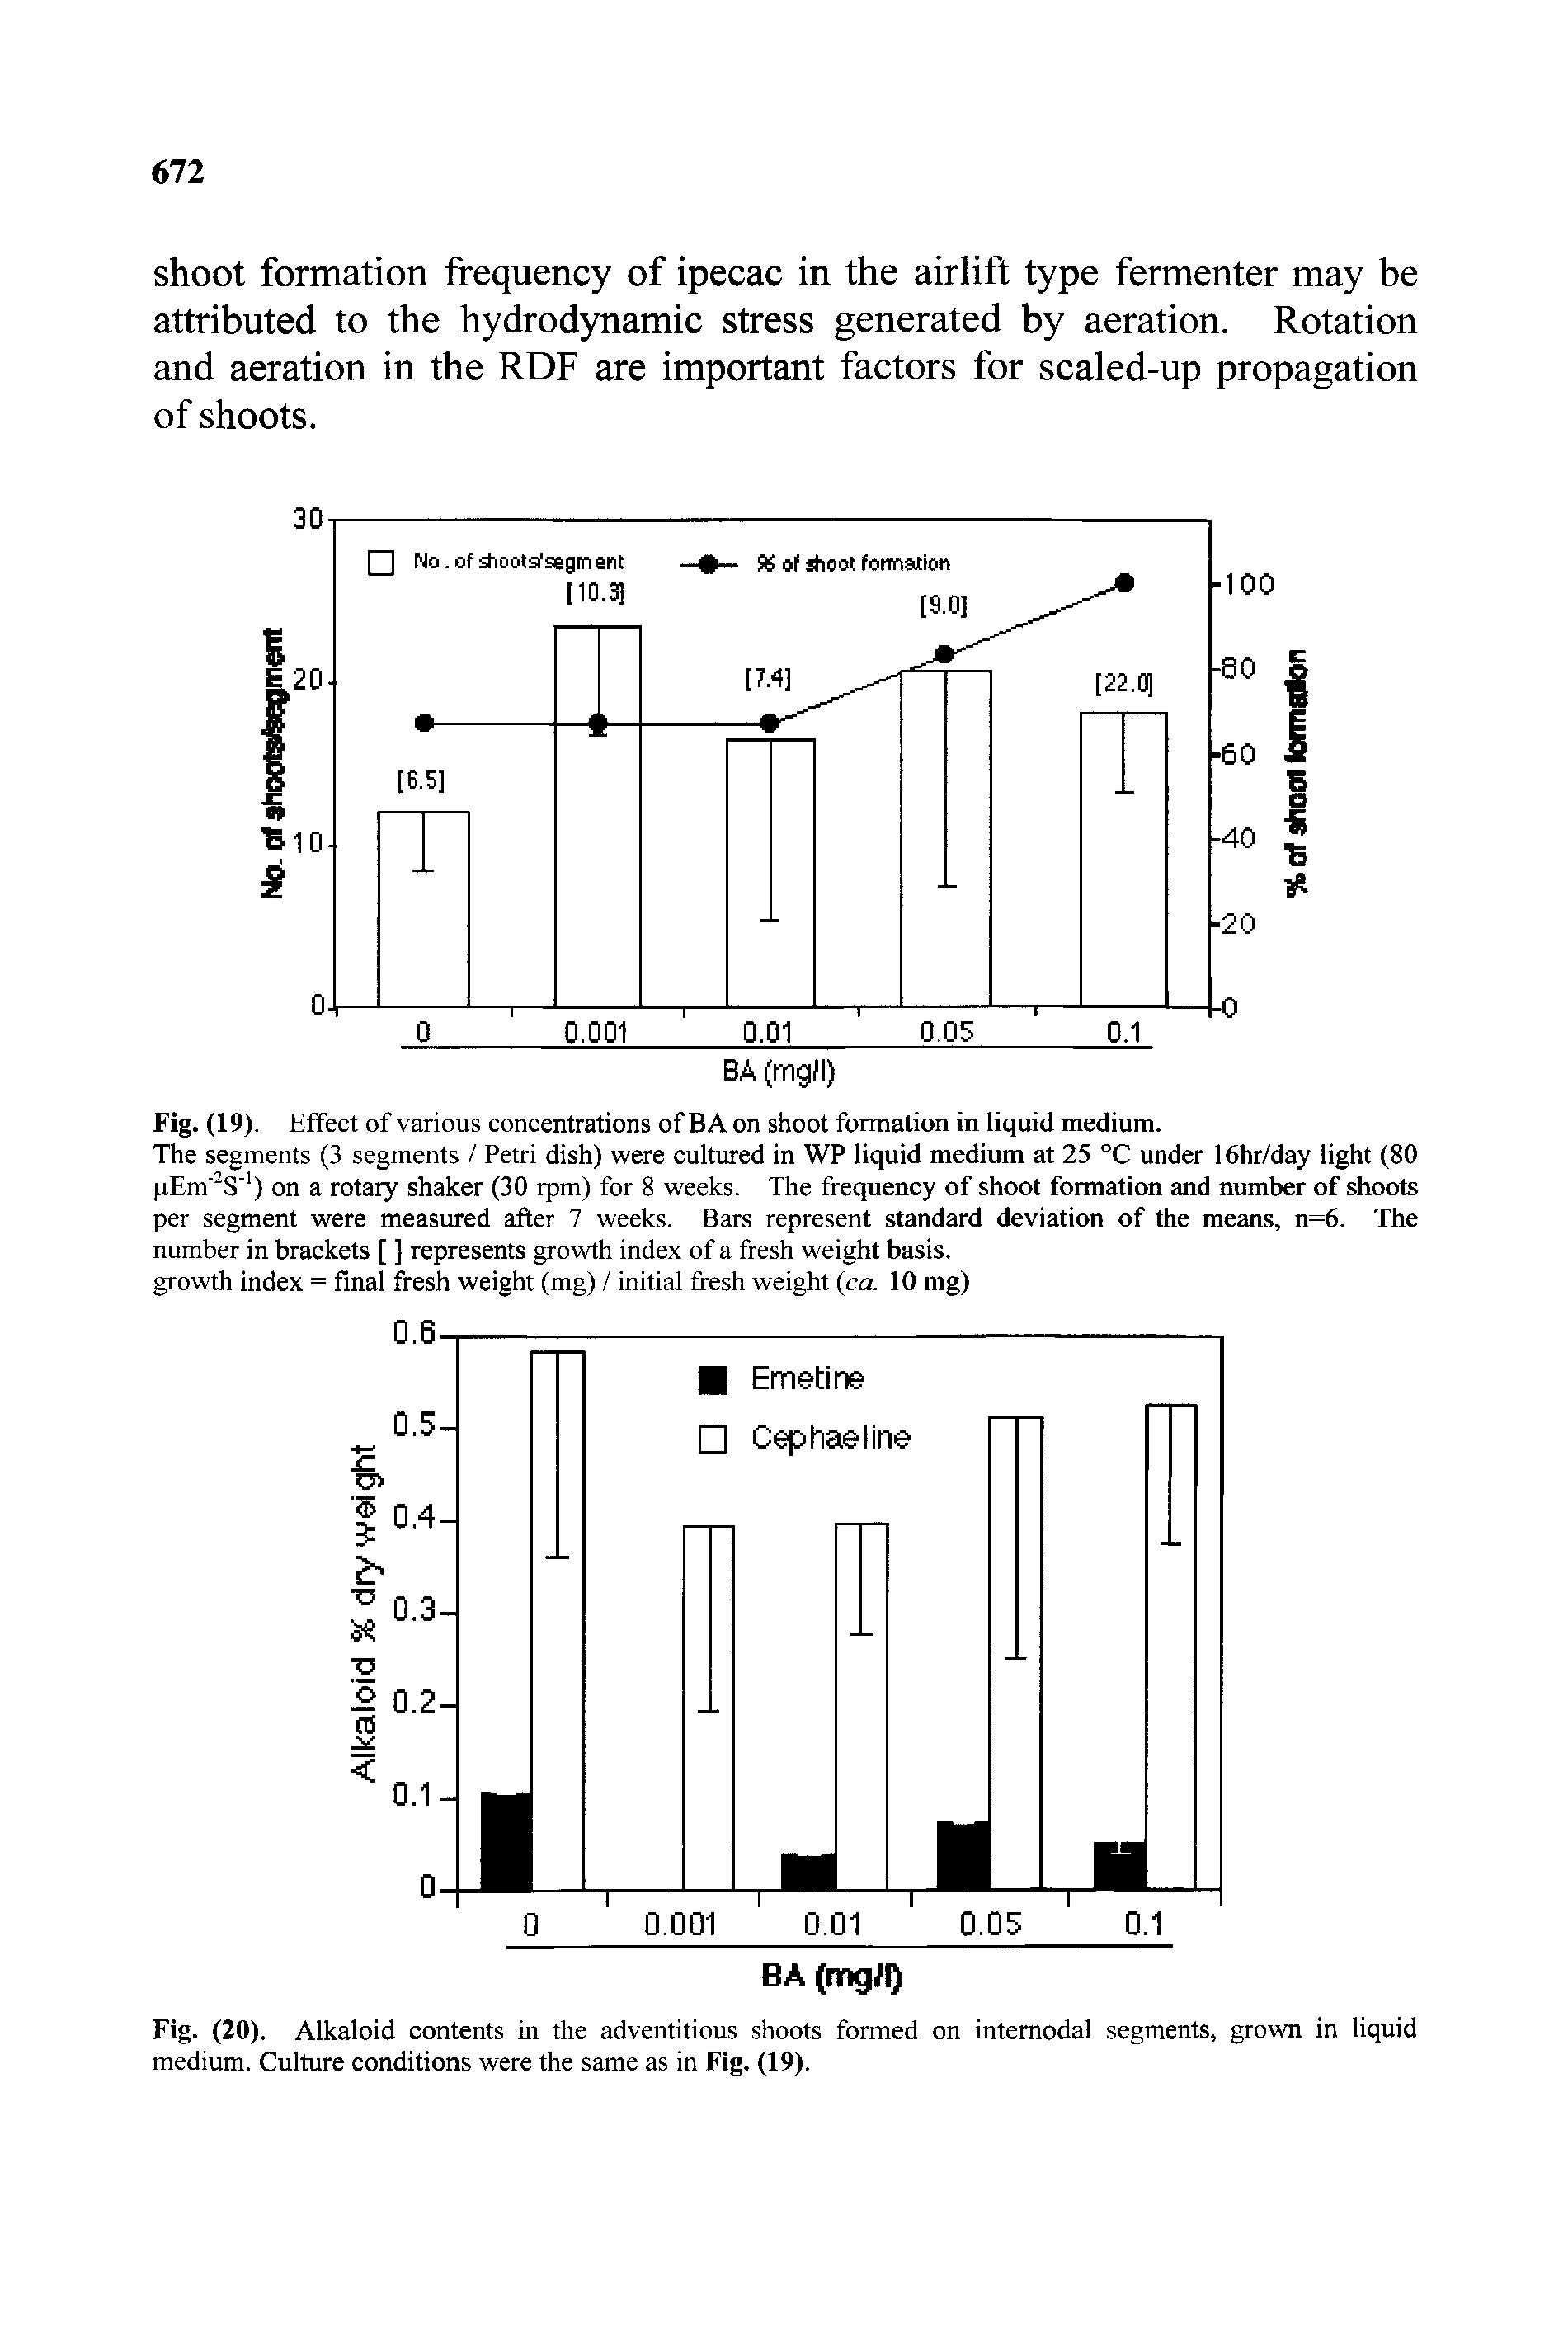 Fig. (19). Effect of various concentrations of BA on shoot formation in liquid medium.